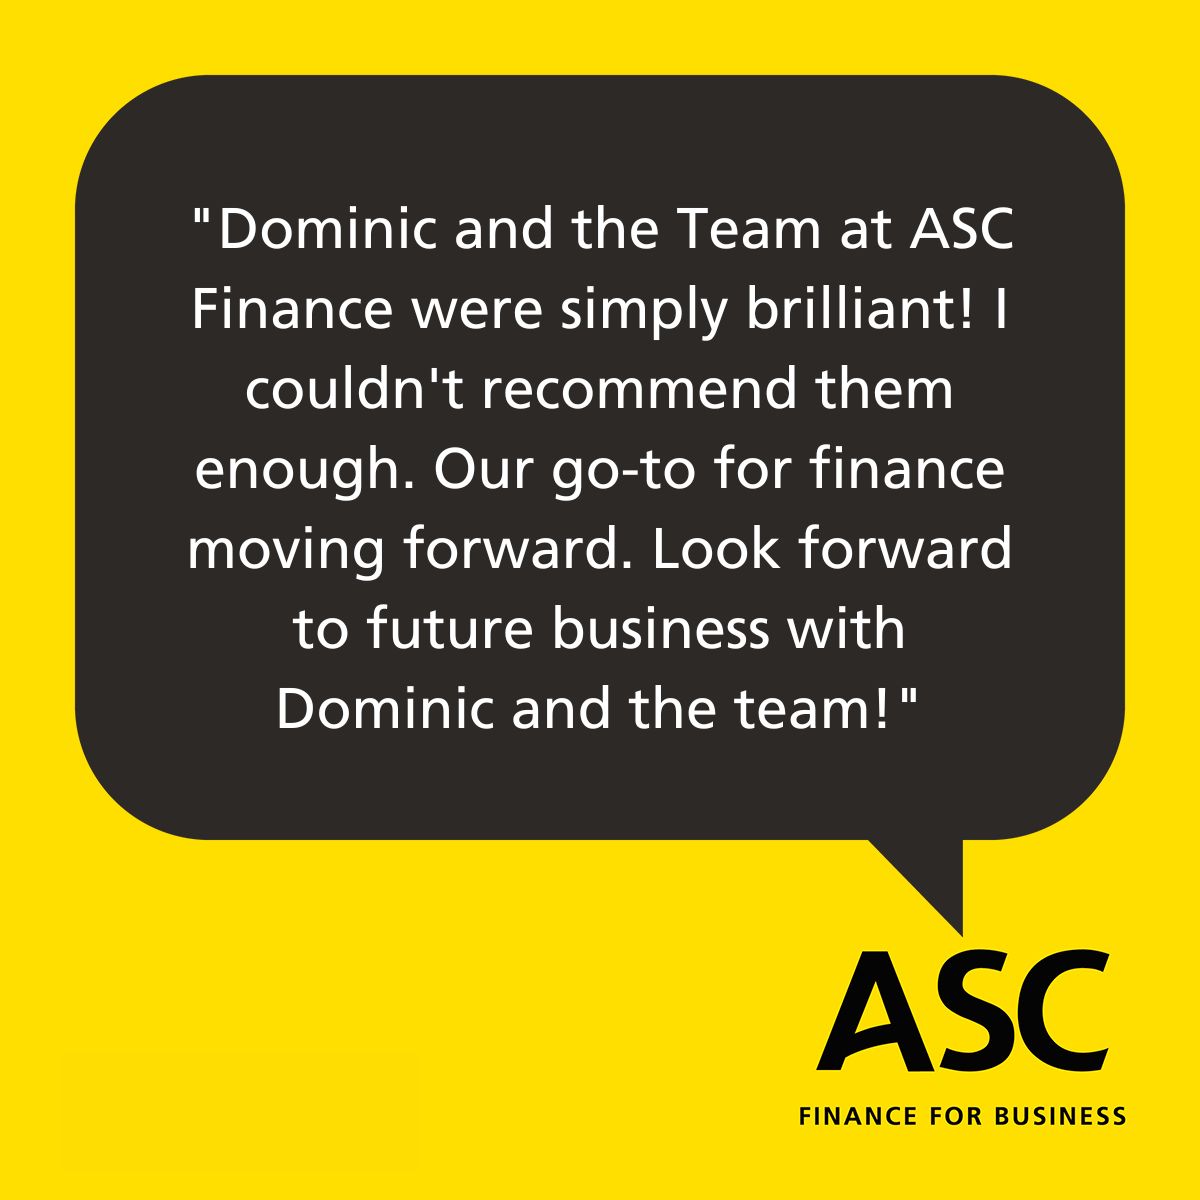 Why use ASC Finance for Business? Because we're simply brilliant! Here's another five-star review for Dominic and his team in our Hove office. 
'Dominic and the Team at ASC Finance were simply brilliant!' 
#FinanceBroker #CommercialFinance #BusinessLoan #Finance